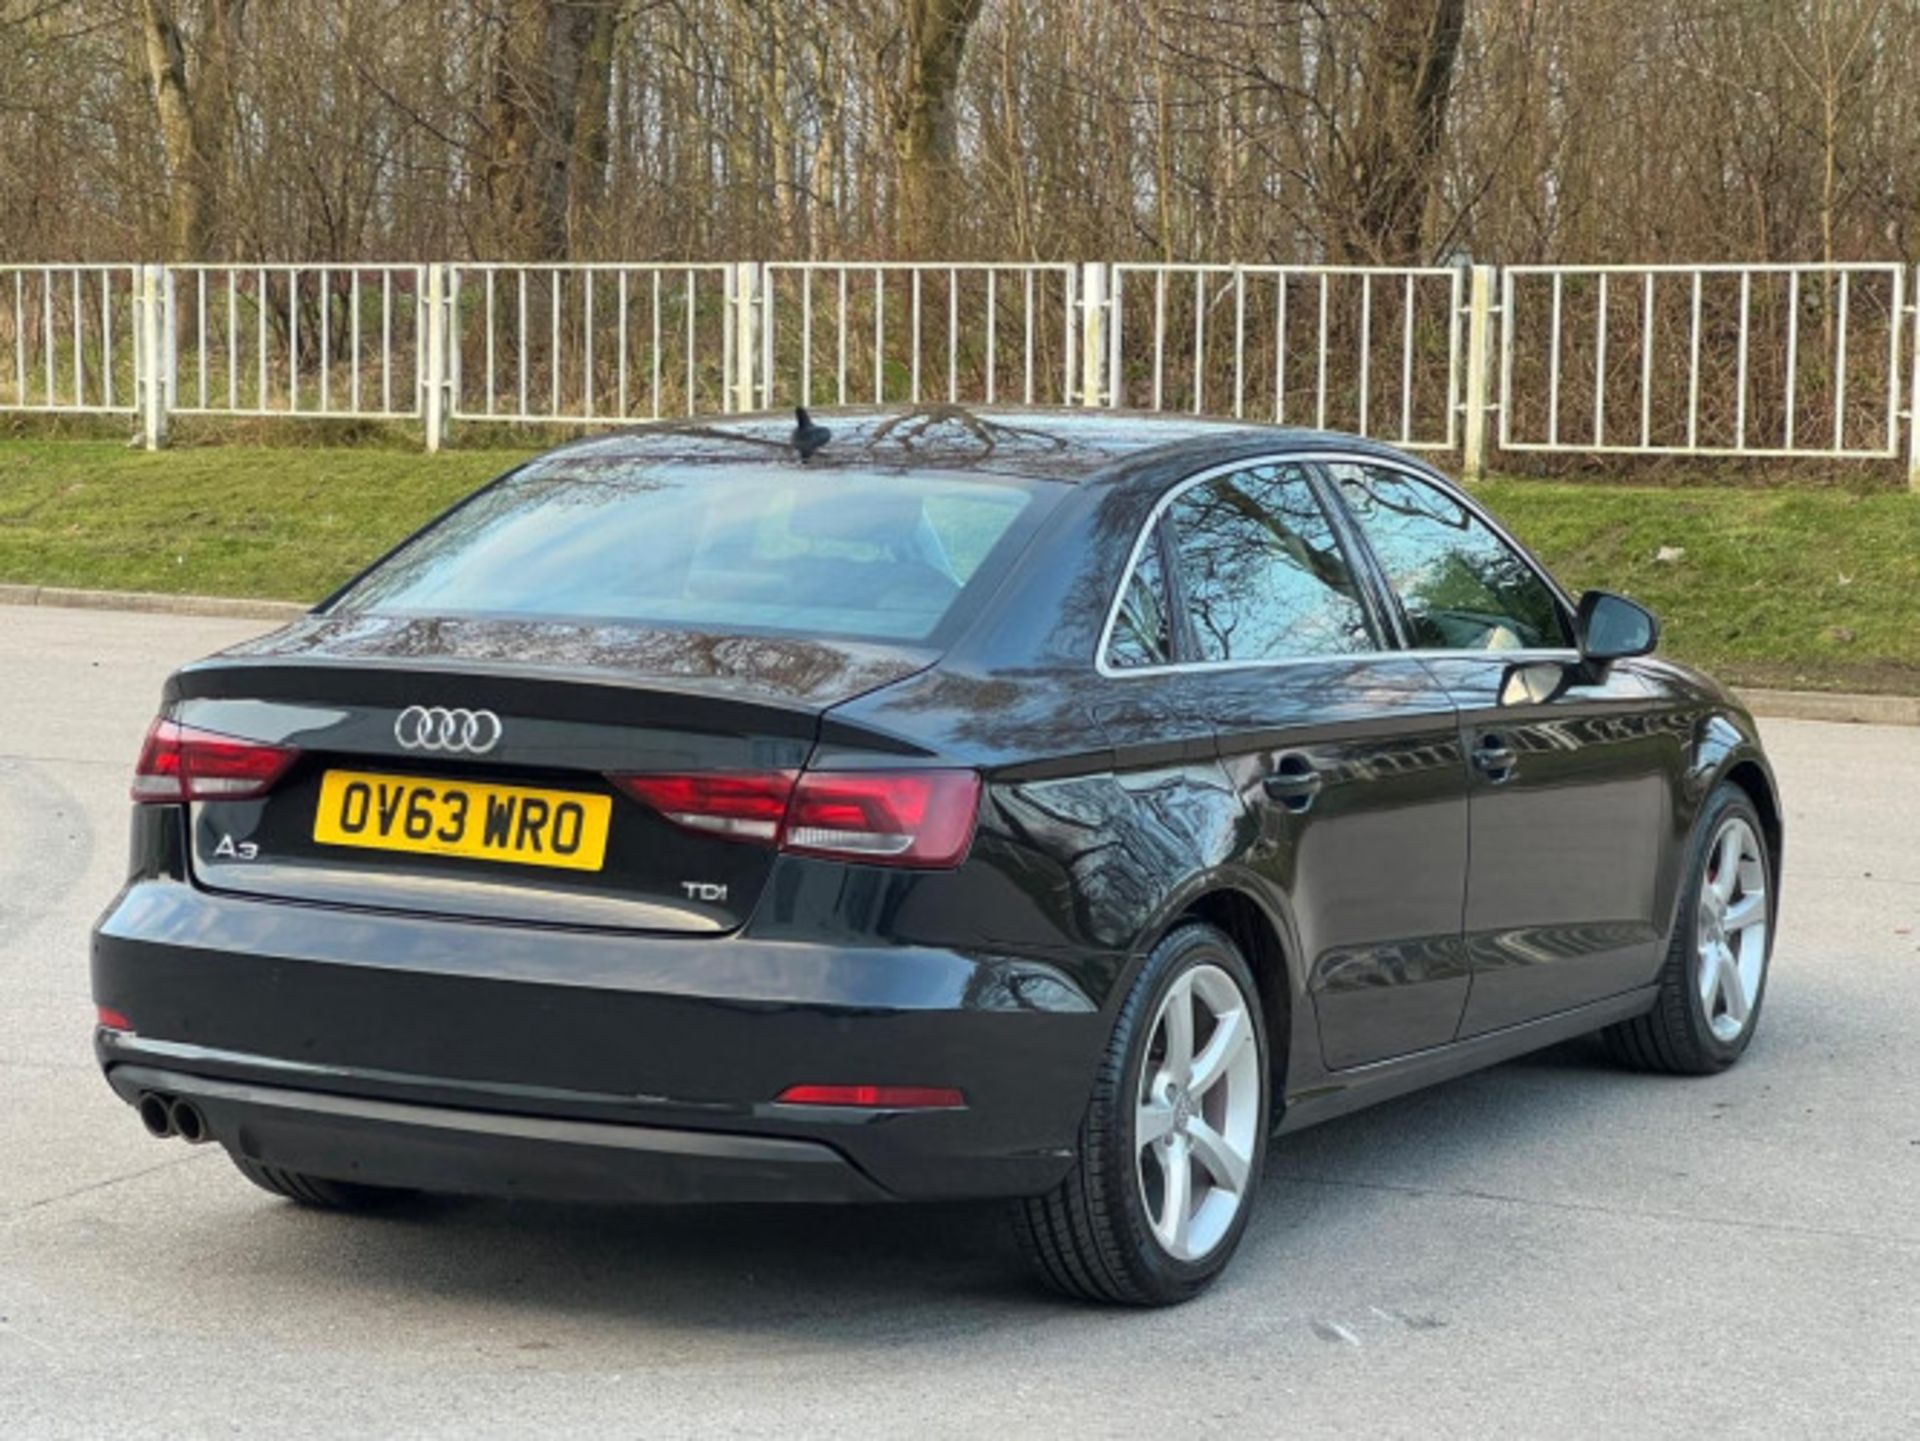 AUDI A3 2.0TDI SPORTBACK - STYLE, PERFORMANCE, AND COMFORT COMBINED >>--NO VAT ON HAMMER--<< - Image 210 of 216